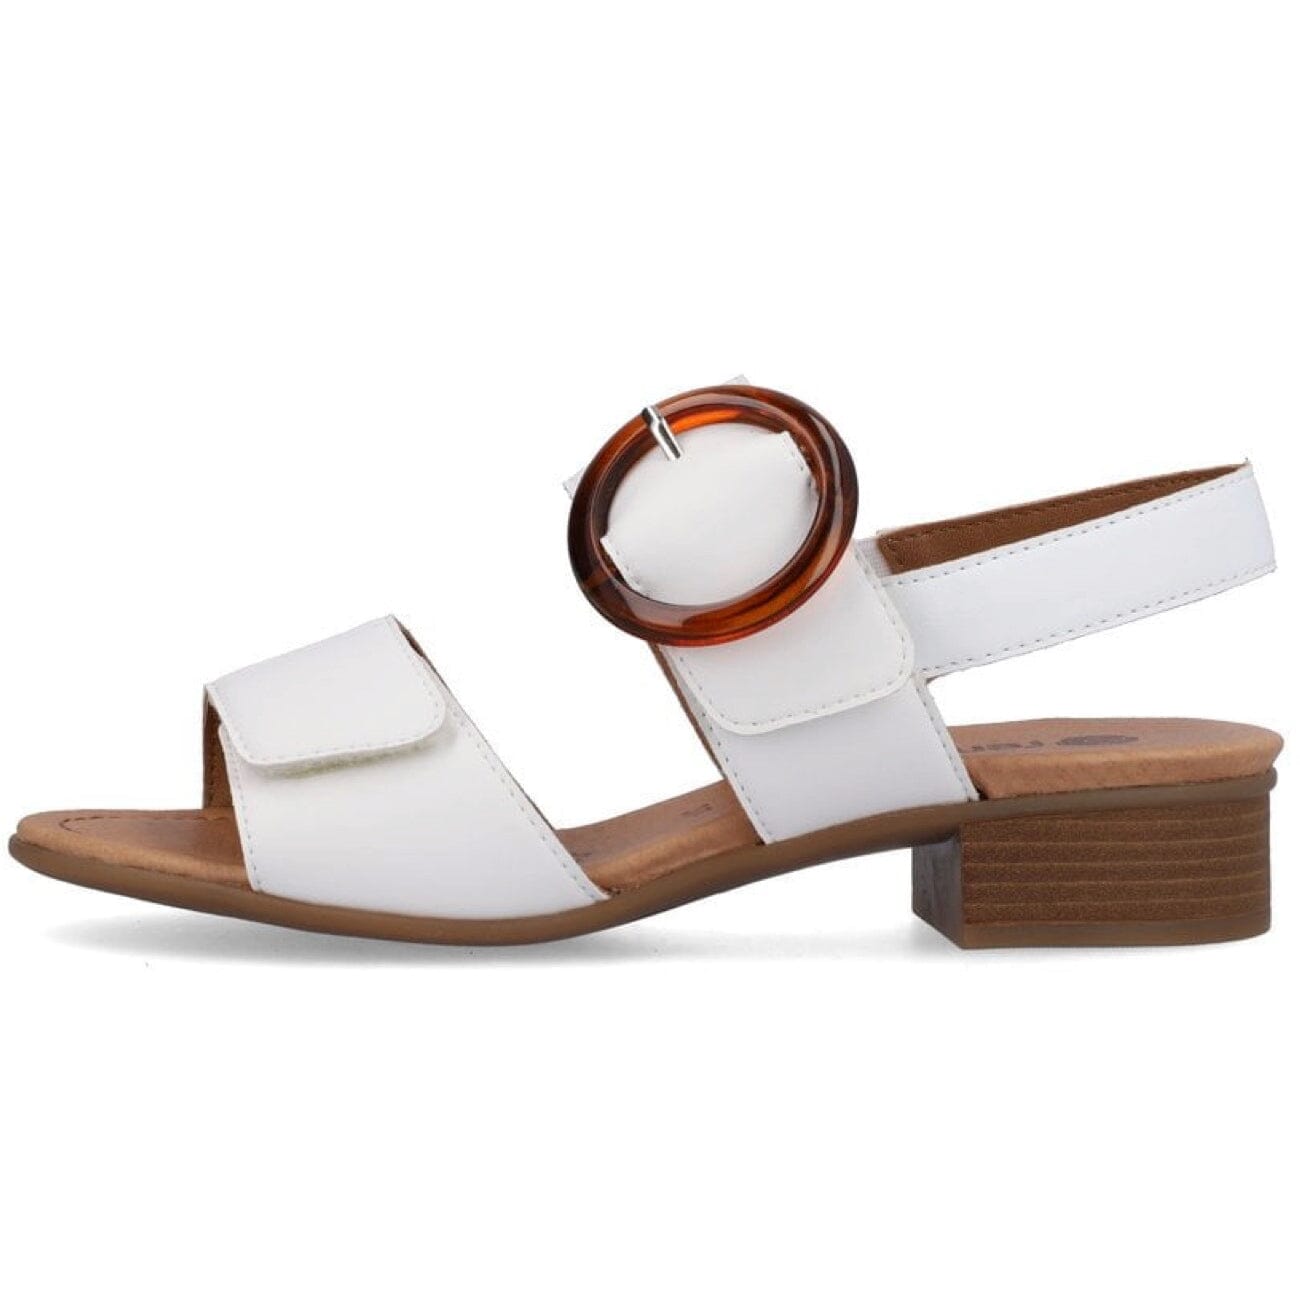 Remonte, Weiss Sandal, Leather, White/Weiss Sandals Remonte Weiss/White 37 